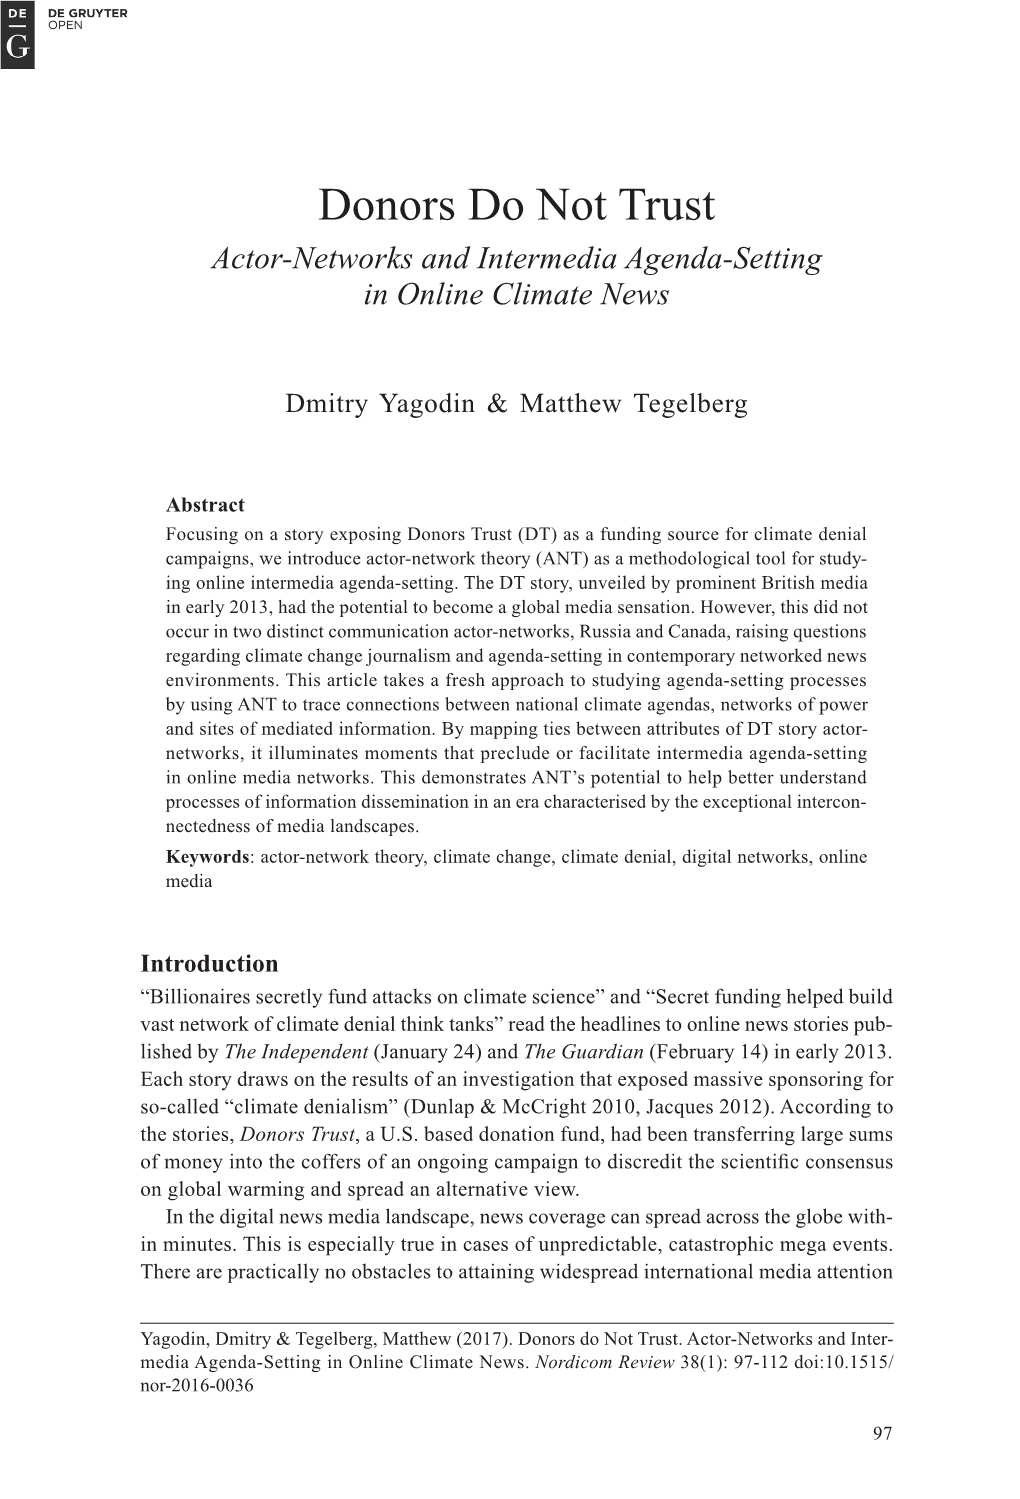 Donors Do Not Trust Actor-Networks and Intermedia Agenda-Setting in Online Climate News